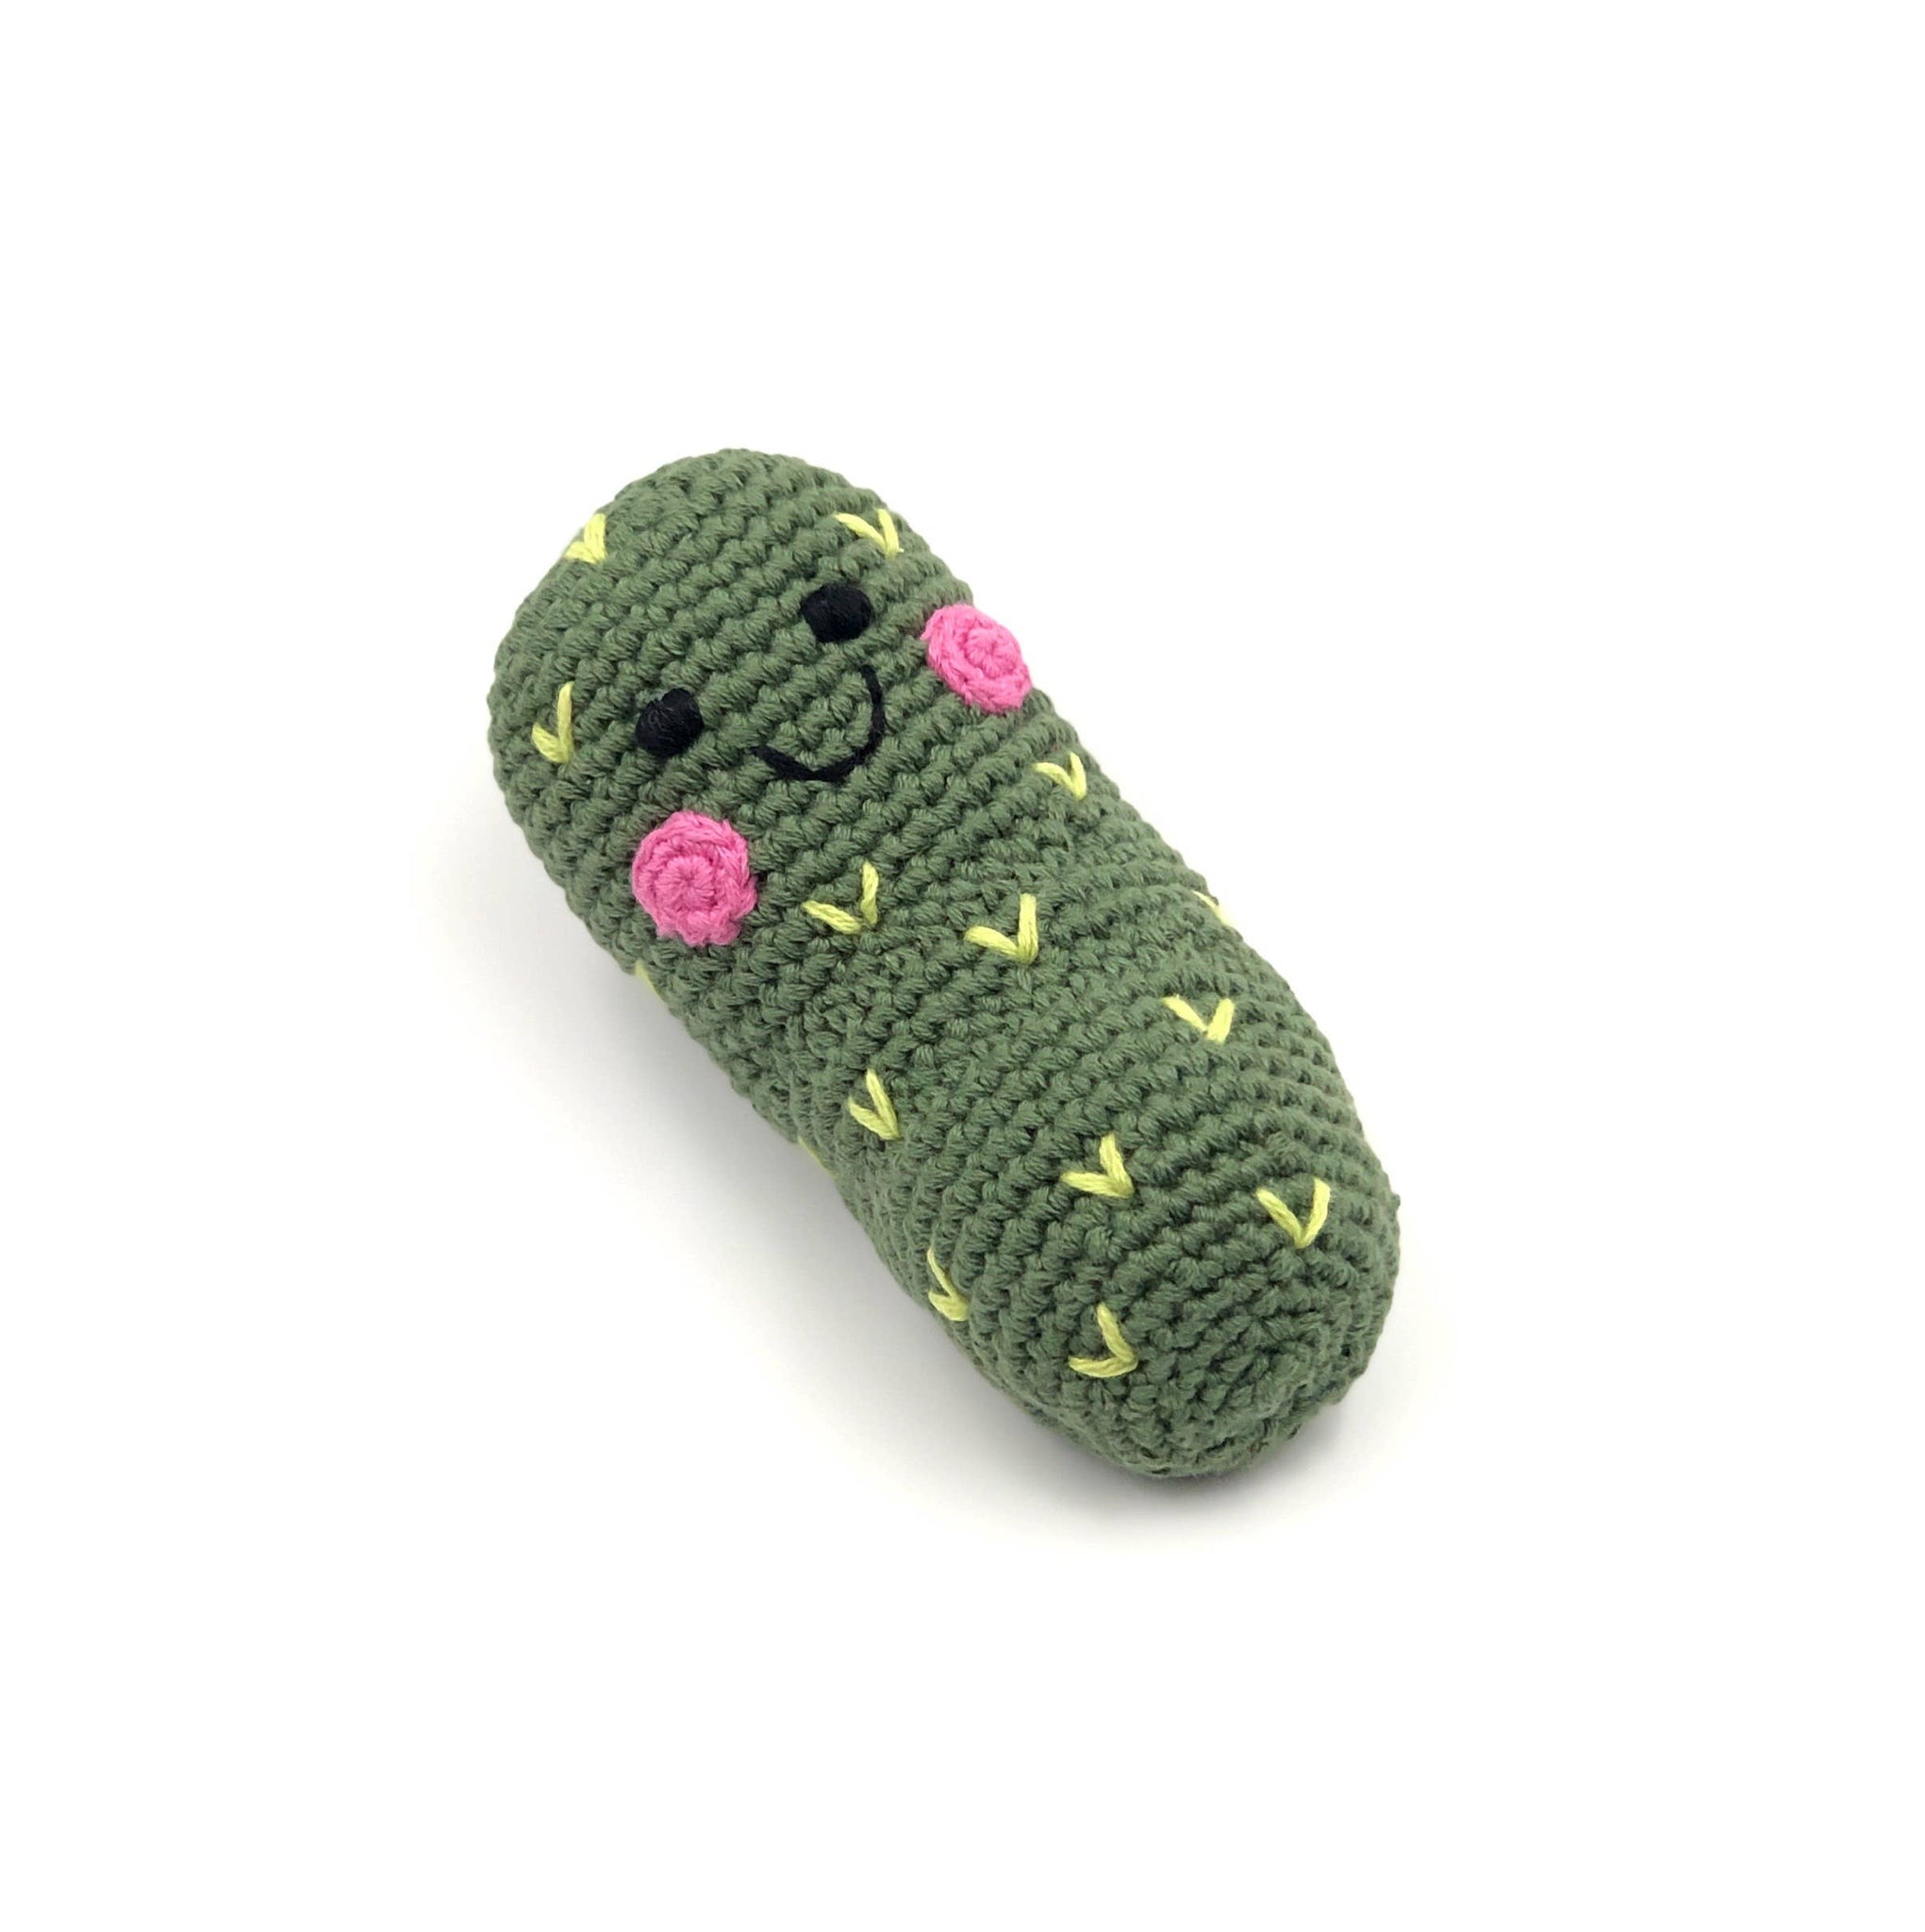 Friendly Pickle Plush Toy Rattle